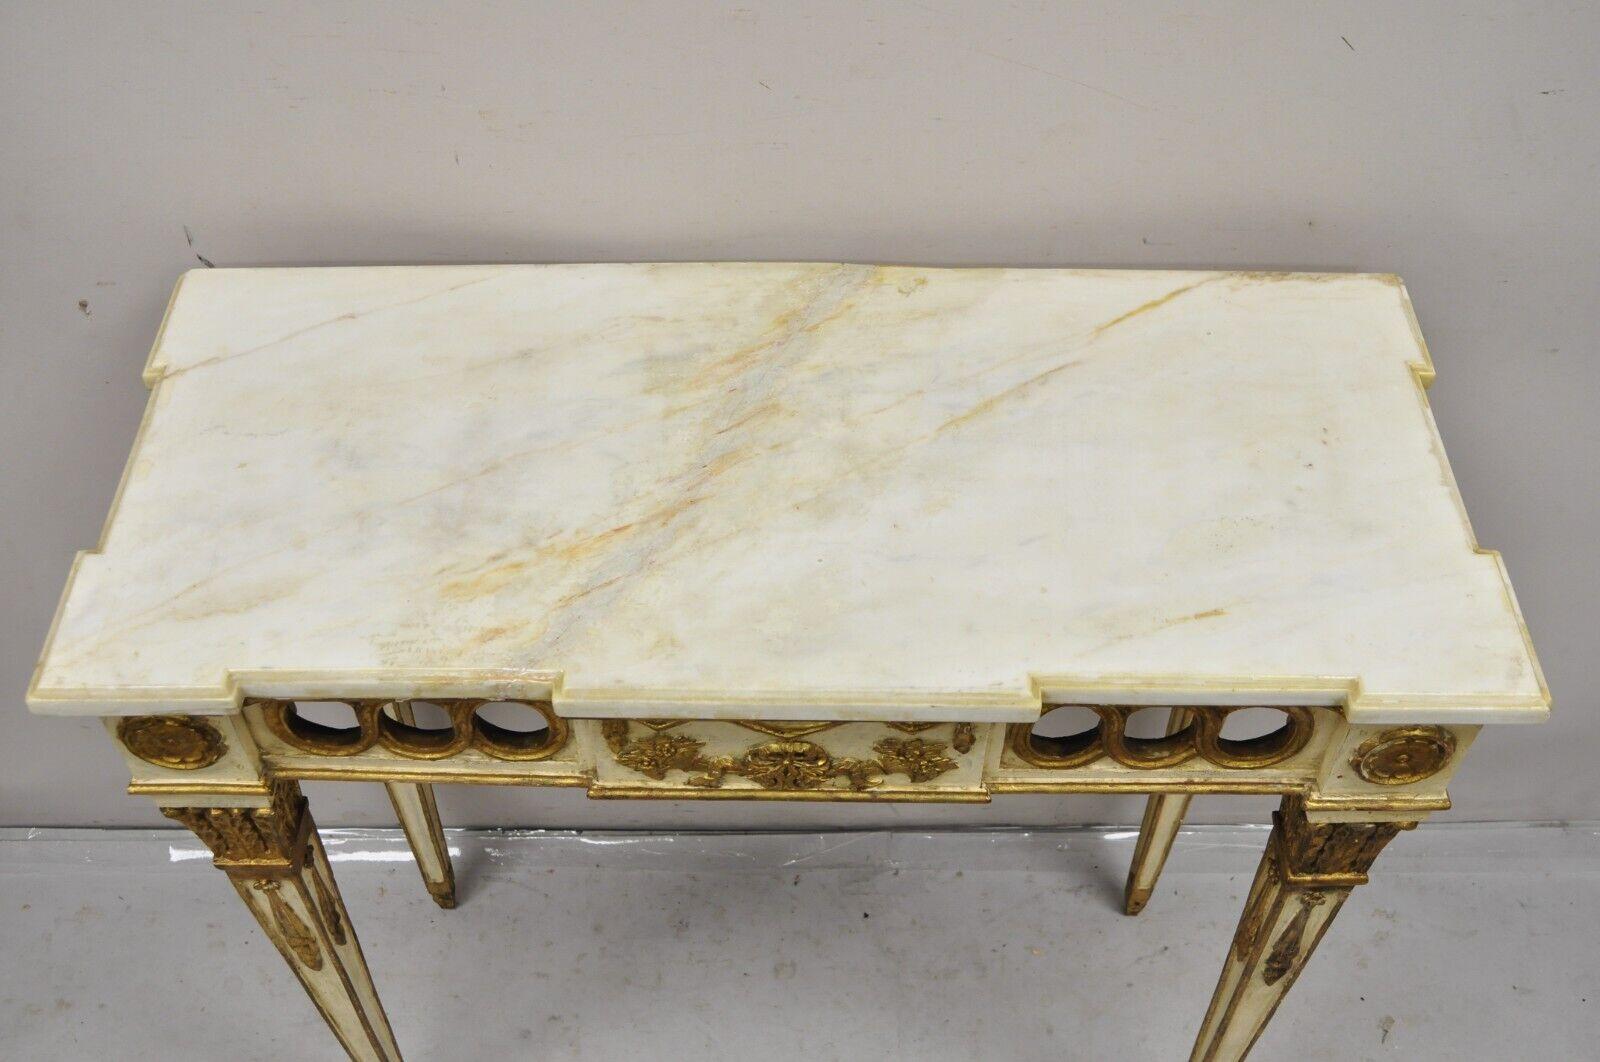 Vintage Italian Neoclassical Style Marble Top Cream and Gold Gilt Console Table In Good Condition For Sale In Philadelphia, PA